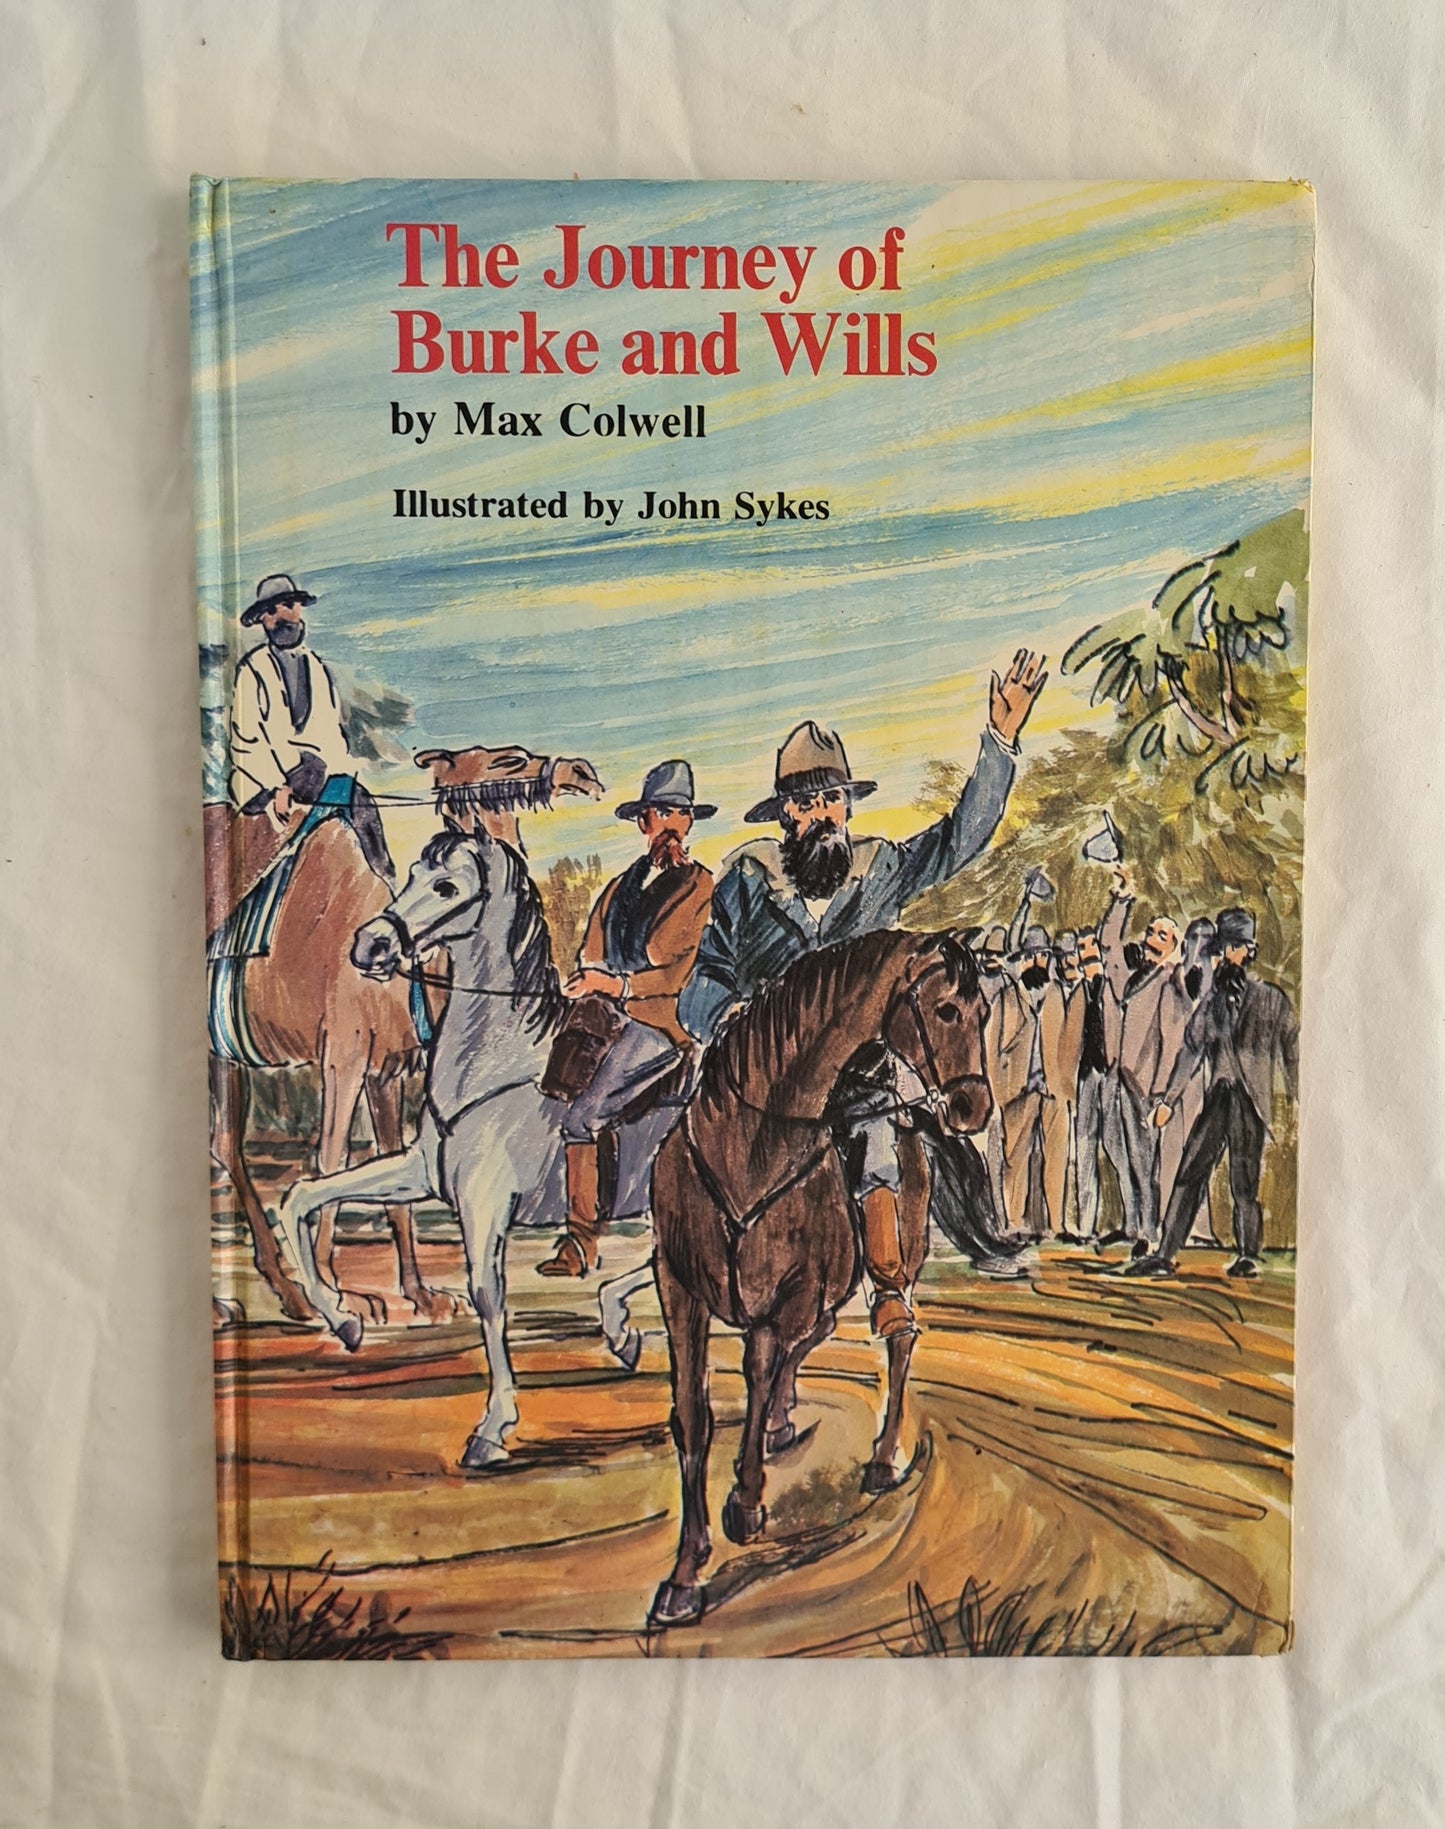 The Journey of Burke and Wills  by Max Colwell  illustrated by John Sykes